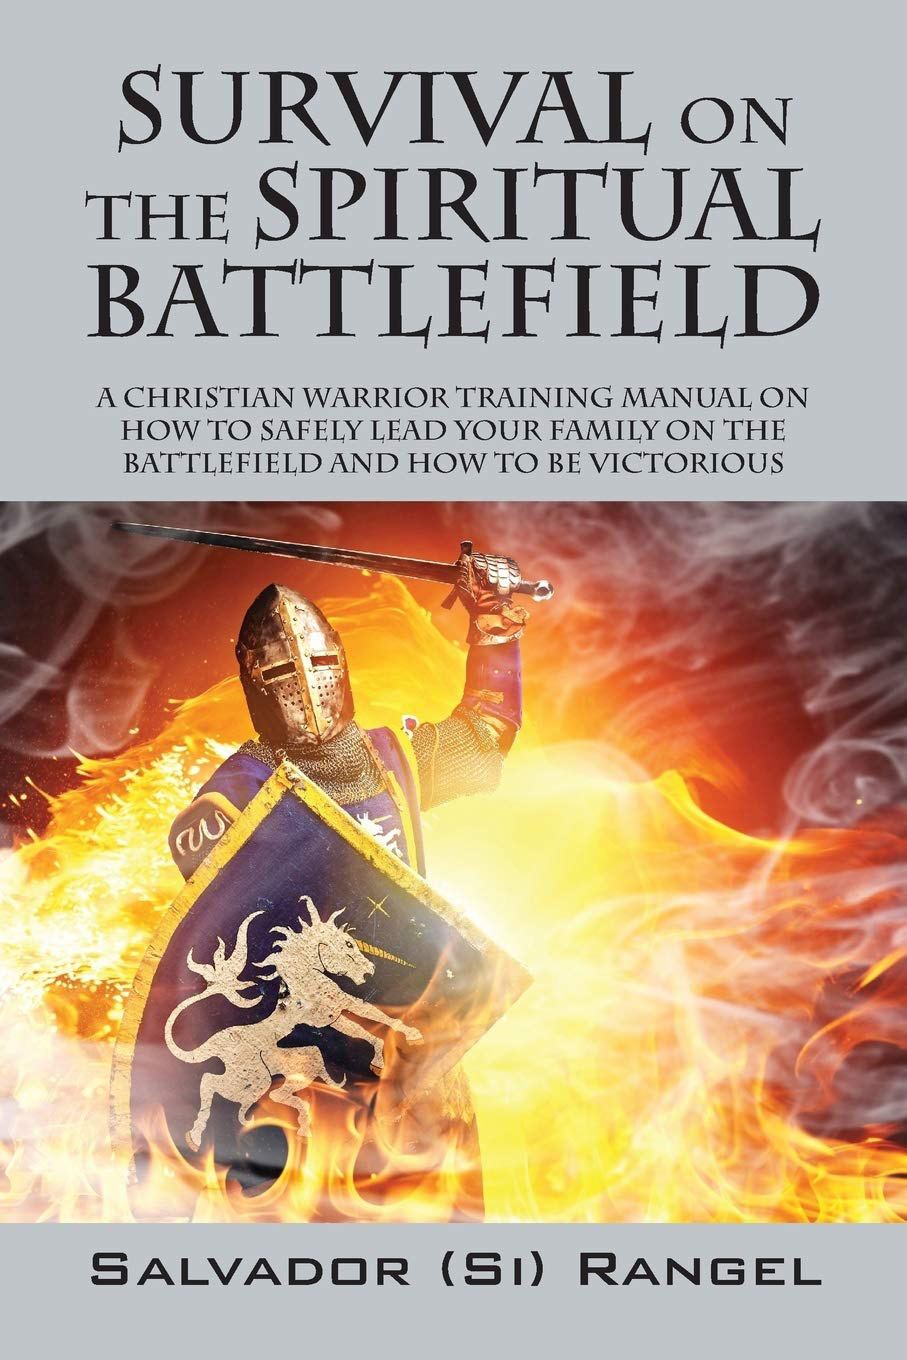 Survival on the Spiritual Battlefield book cover